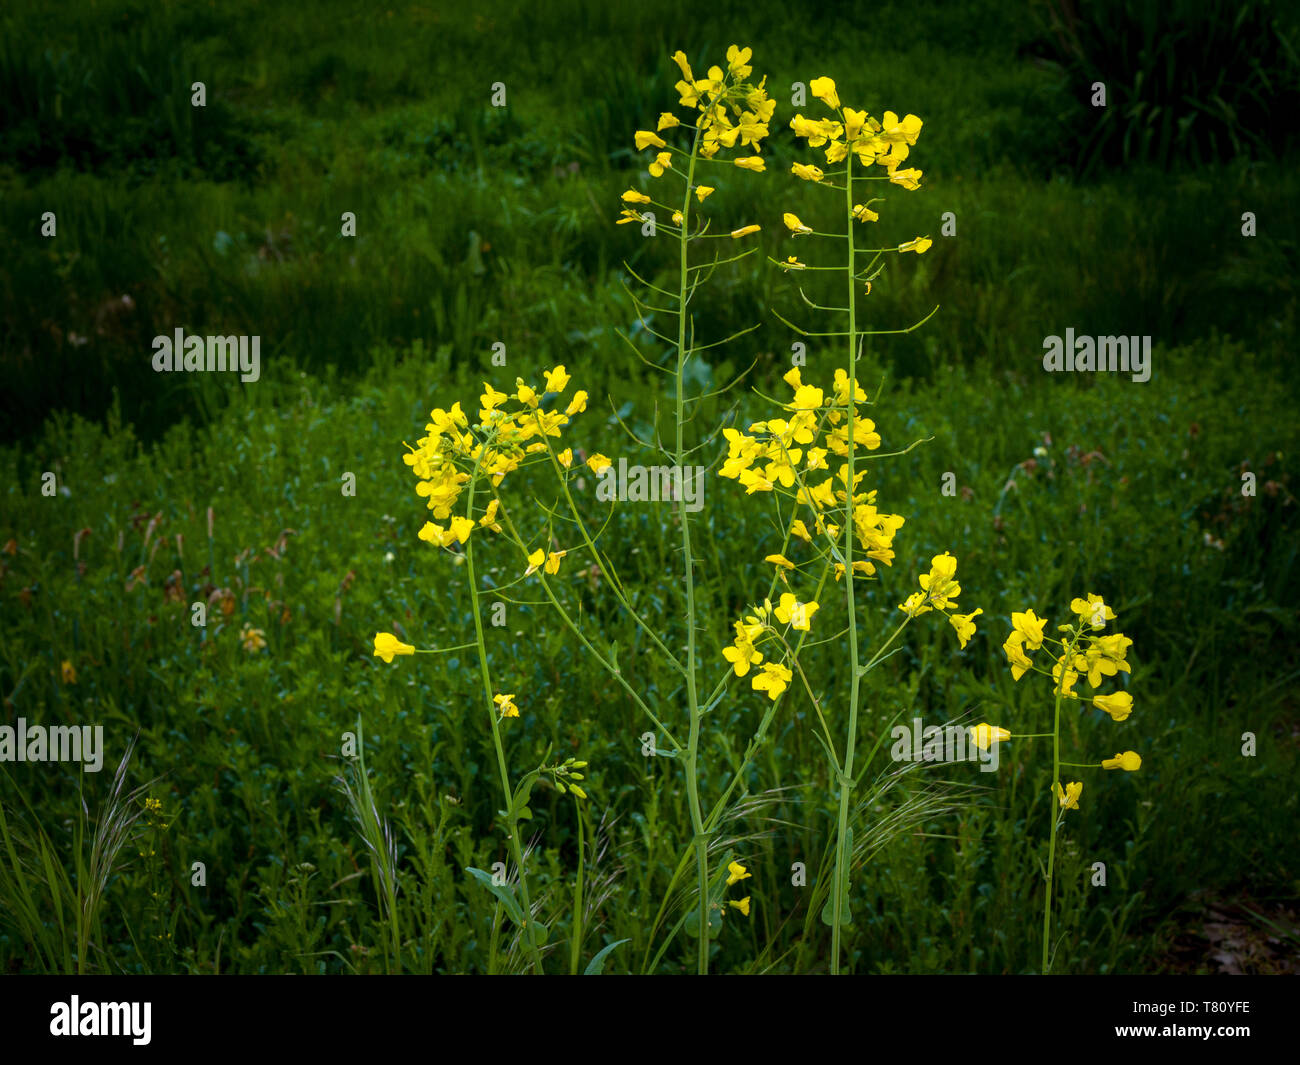 Single yellow canola plant flowering surrounded by grass. Stock Photo